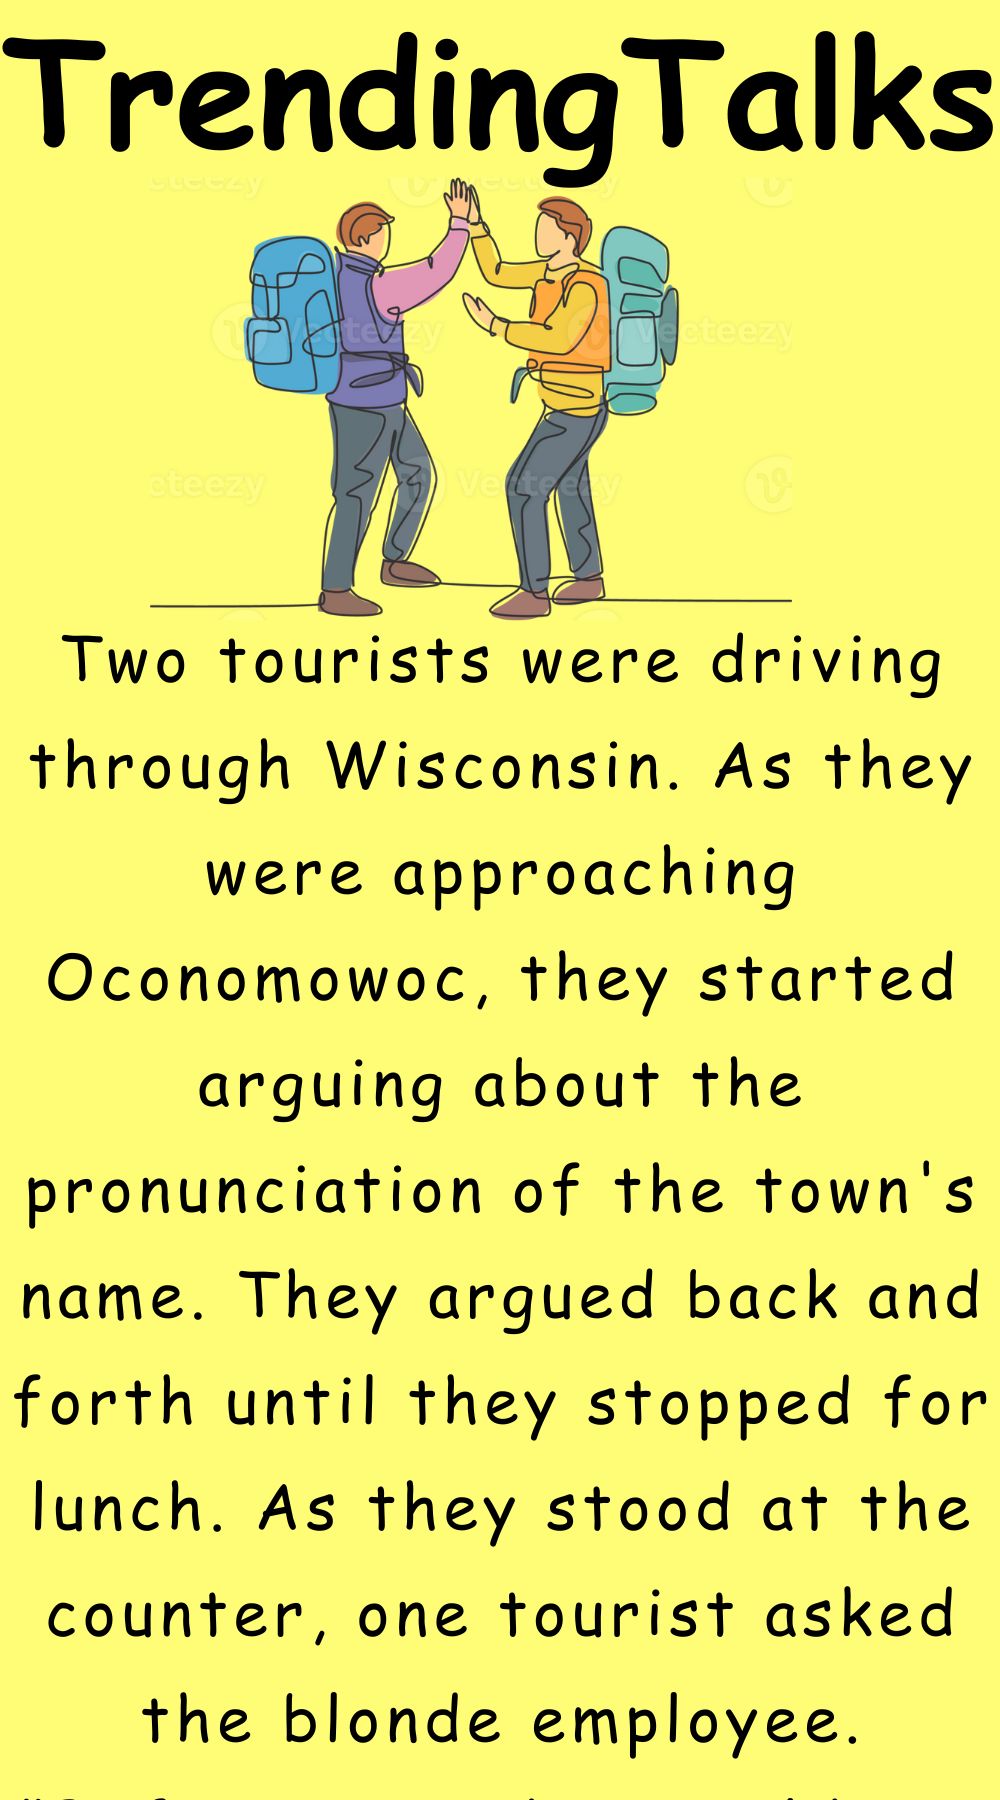 Two tourists were driving through Wisconsin